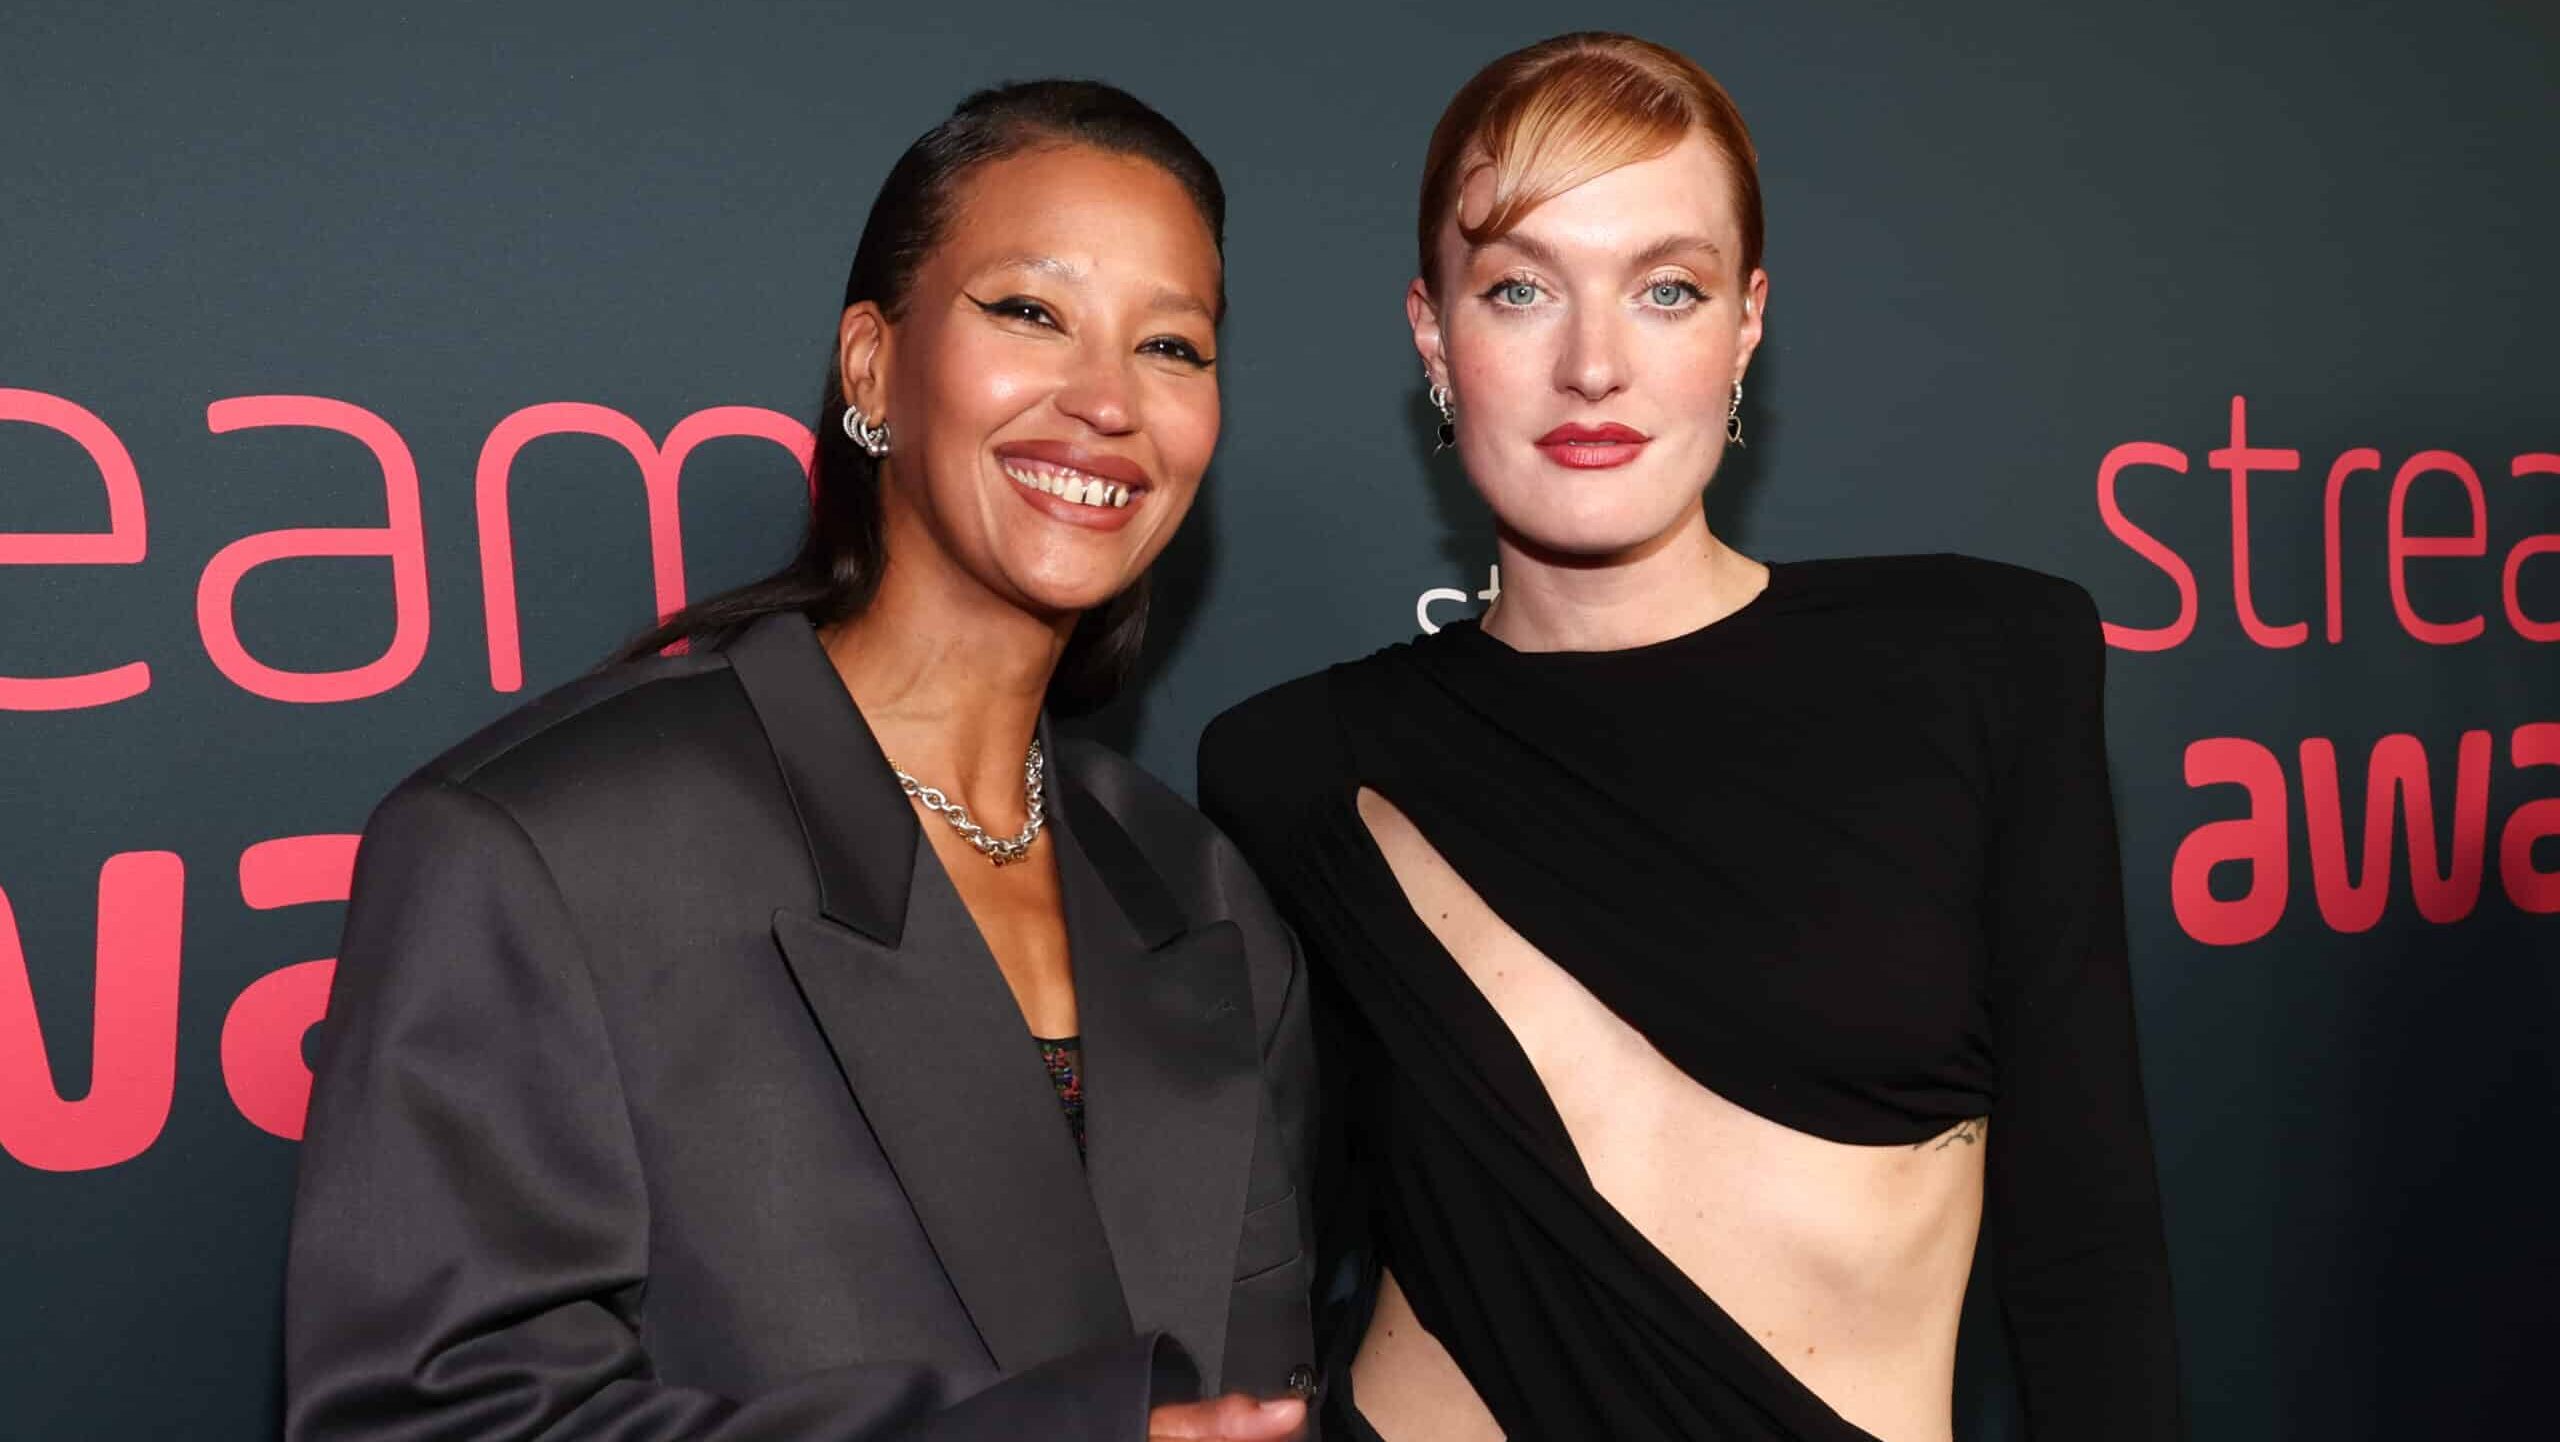 Aino Jawo and Caroline Hjelt of Icona Pop at The 2023 Streamy Awards held at the Fairmont Century Plaza Hotel on August 27, 2023 in Los Angeles, California.